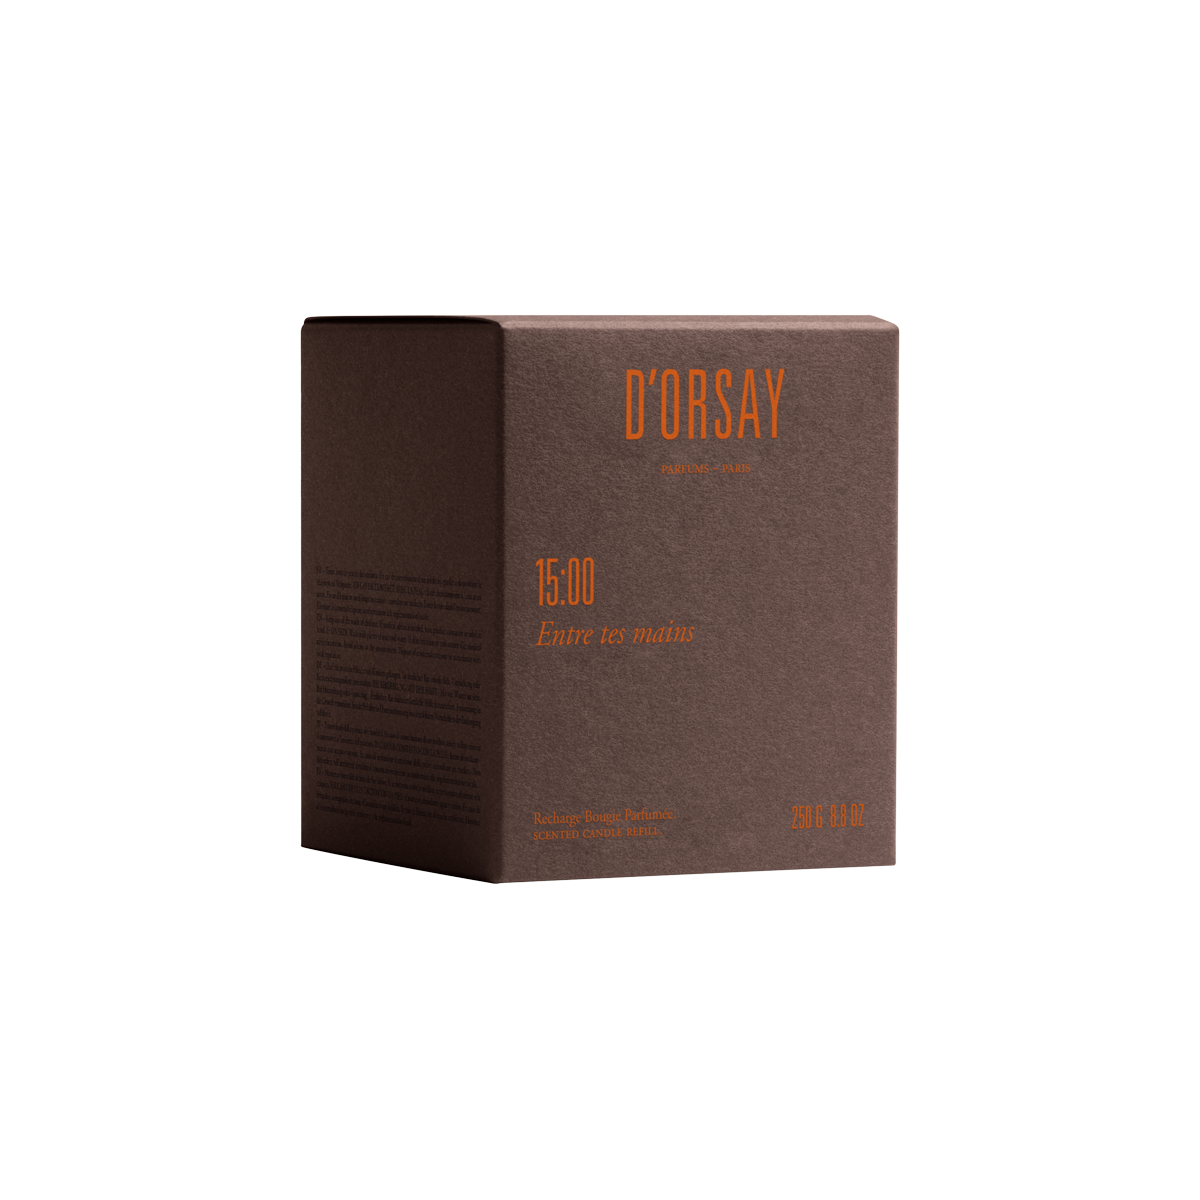 D'Orsay - Scented Candle 15:00 Entre tes Mains